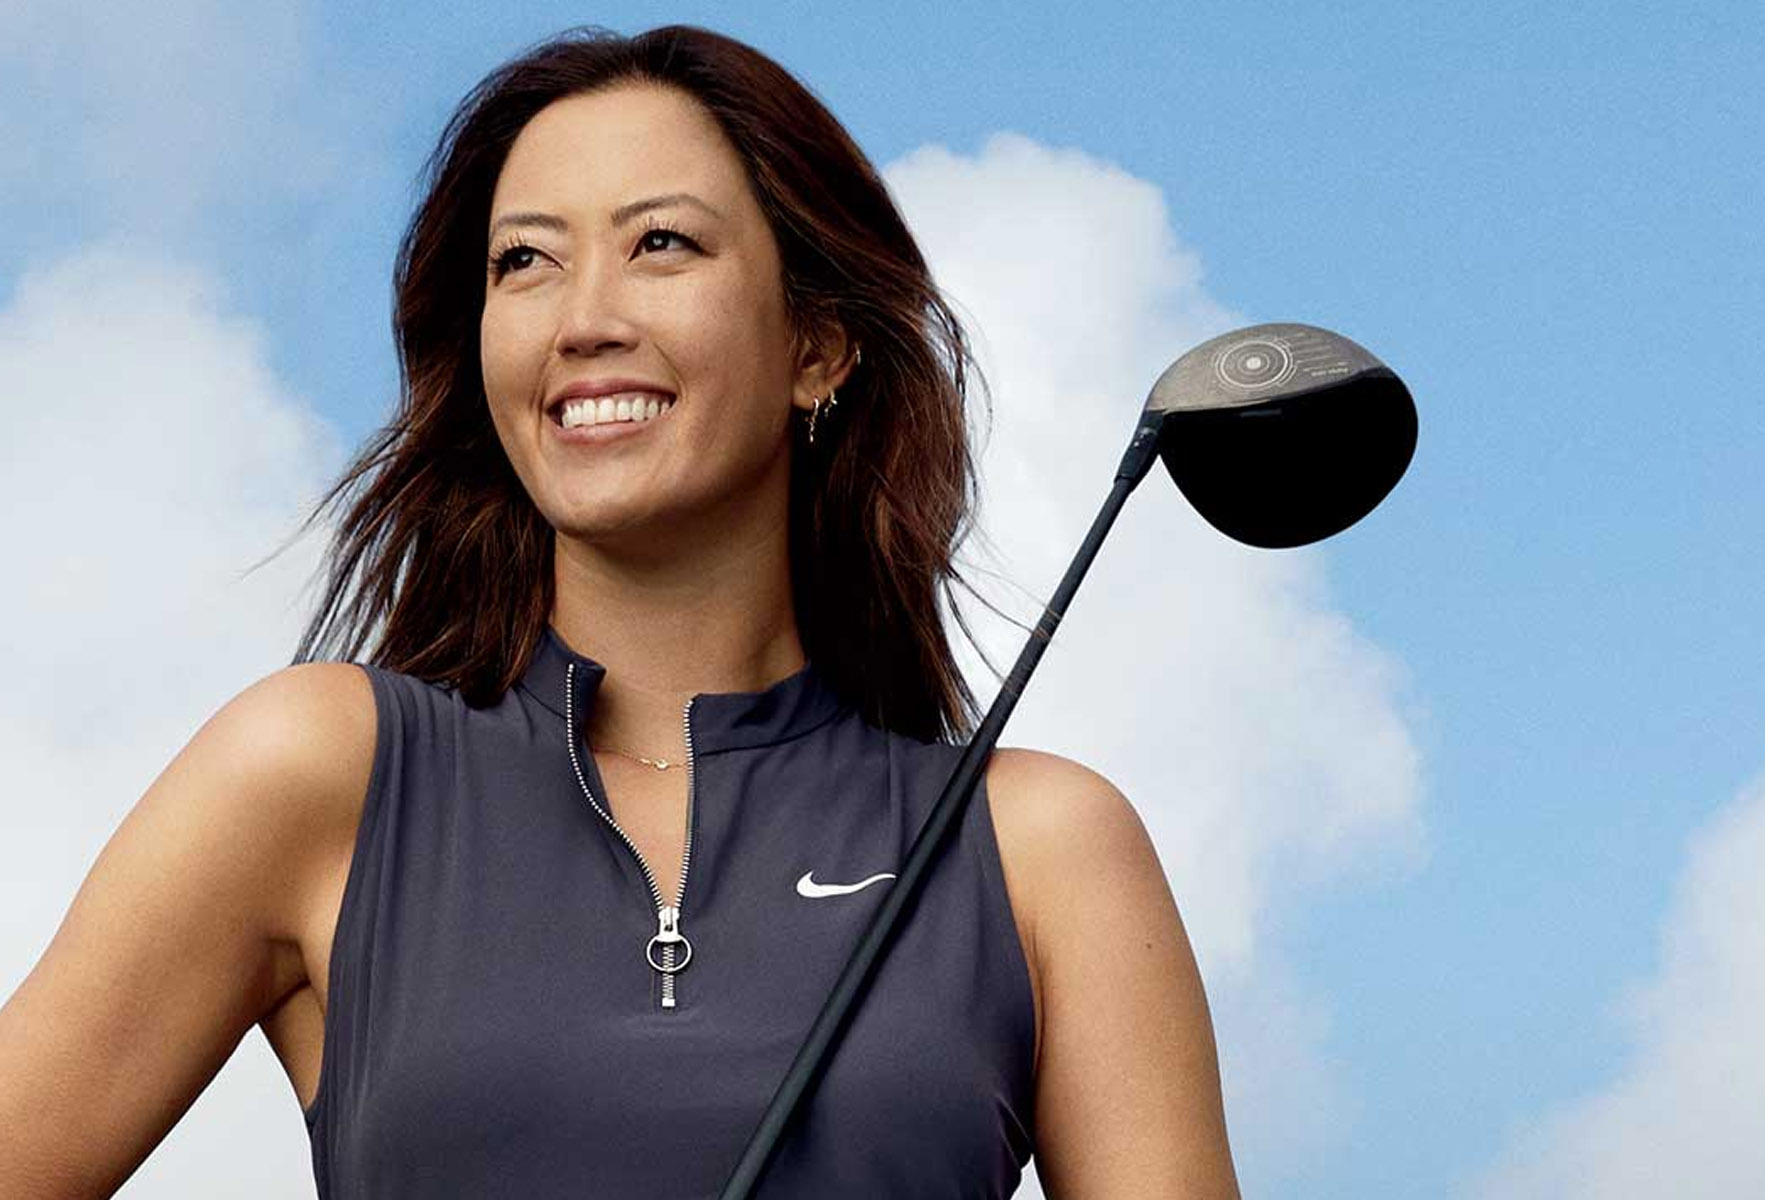 Michelle Wie West May Make A Comeback To Professional Golf, Says “Never Say Never”